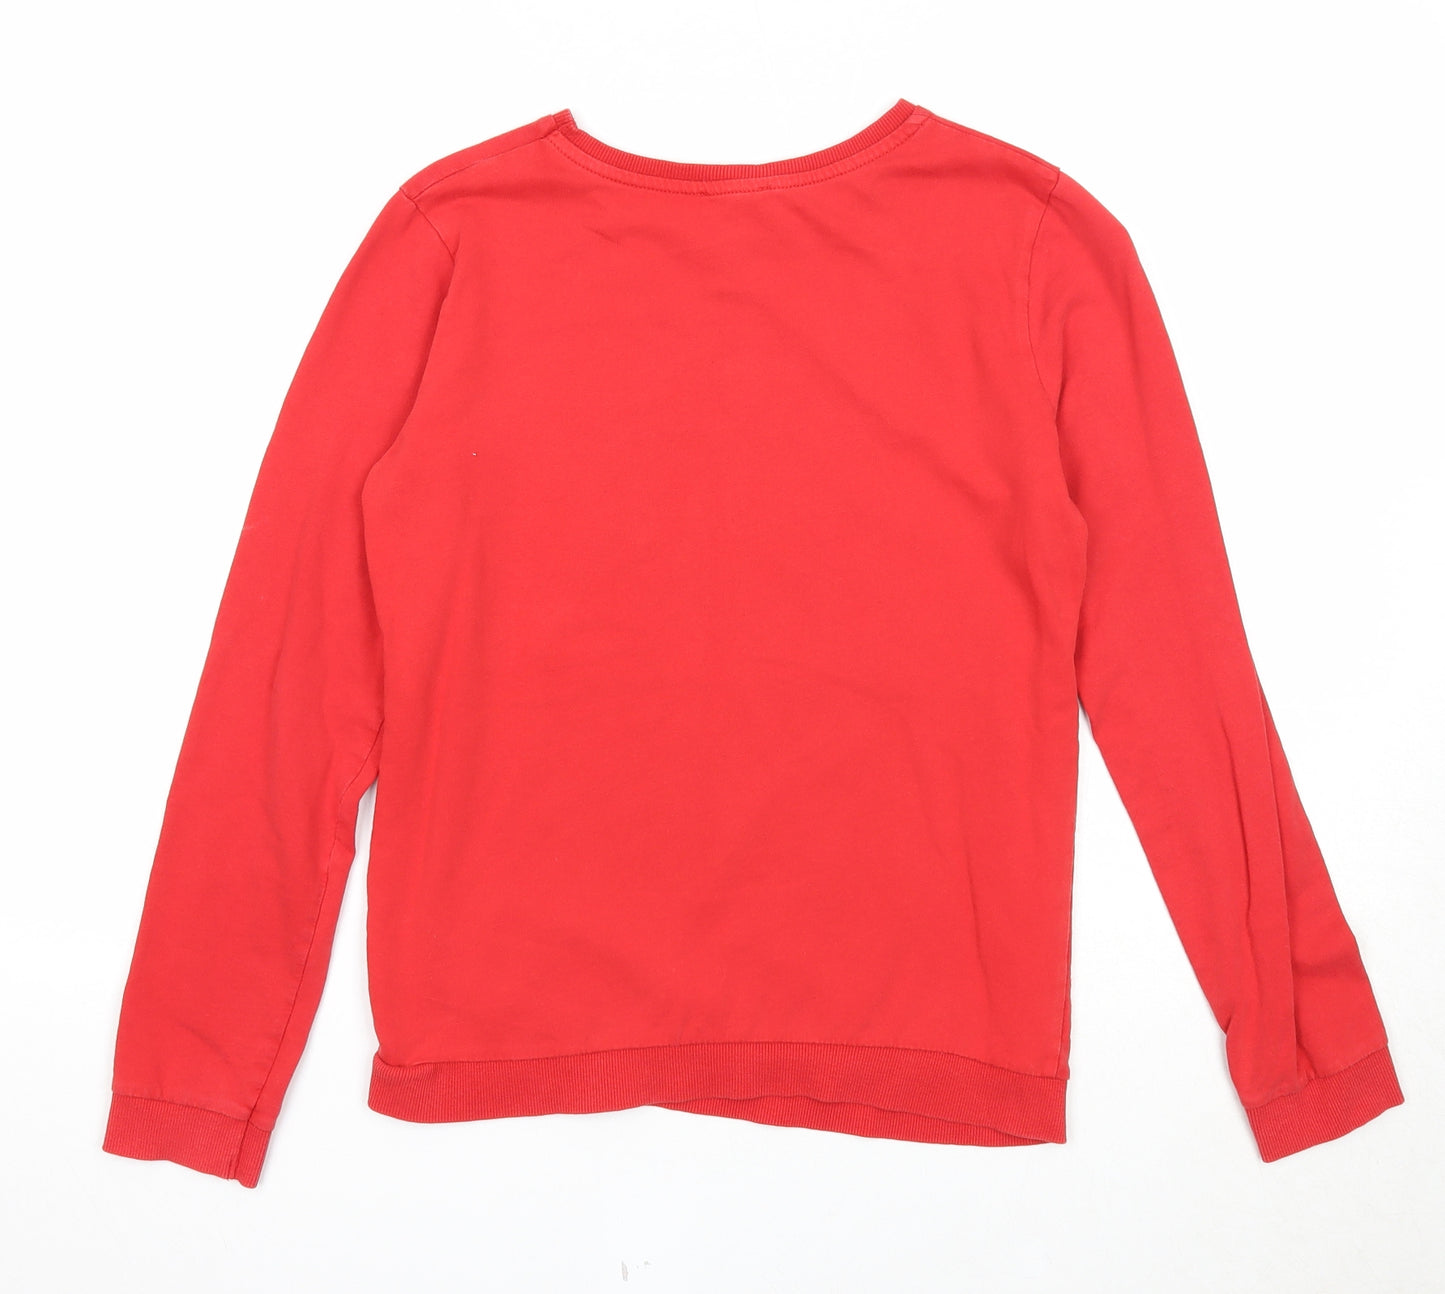 Primark Girls Red Cotton Pullover Sweatshirt Size 13-14 Years Pullover - Team Rudolph Christmas